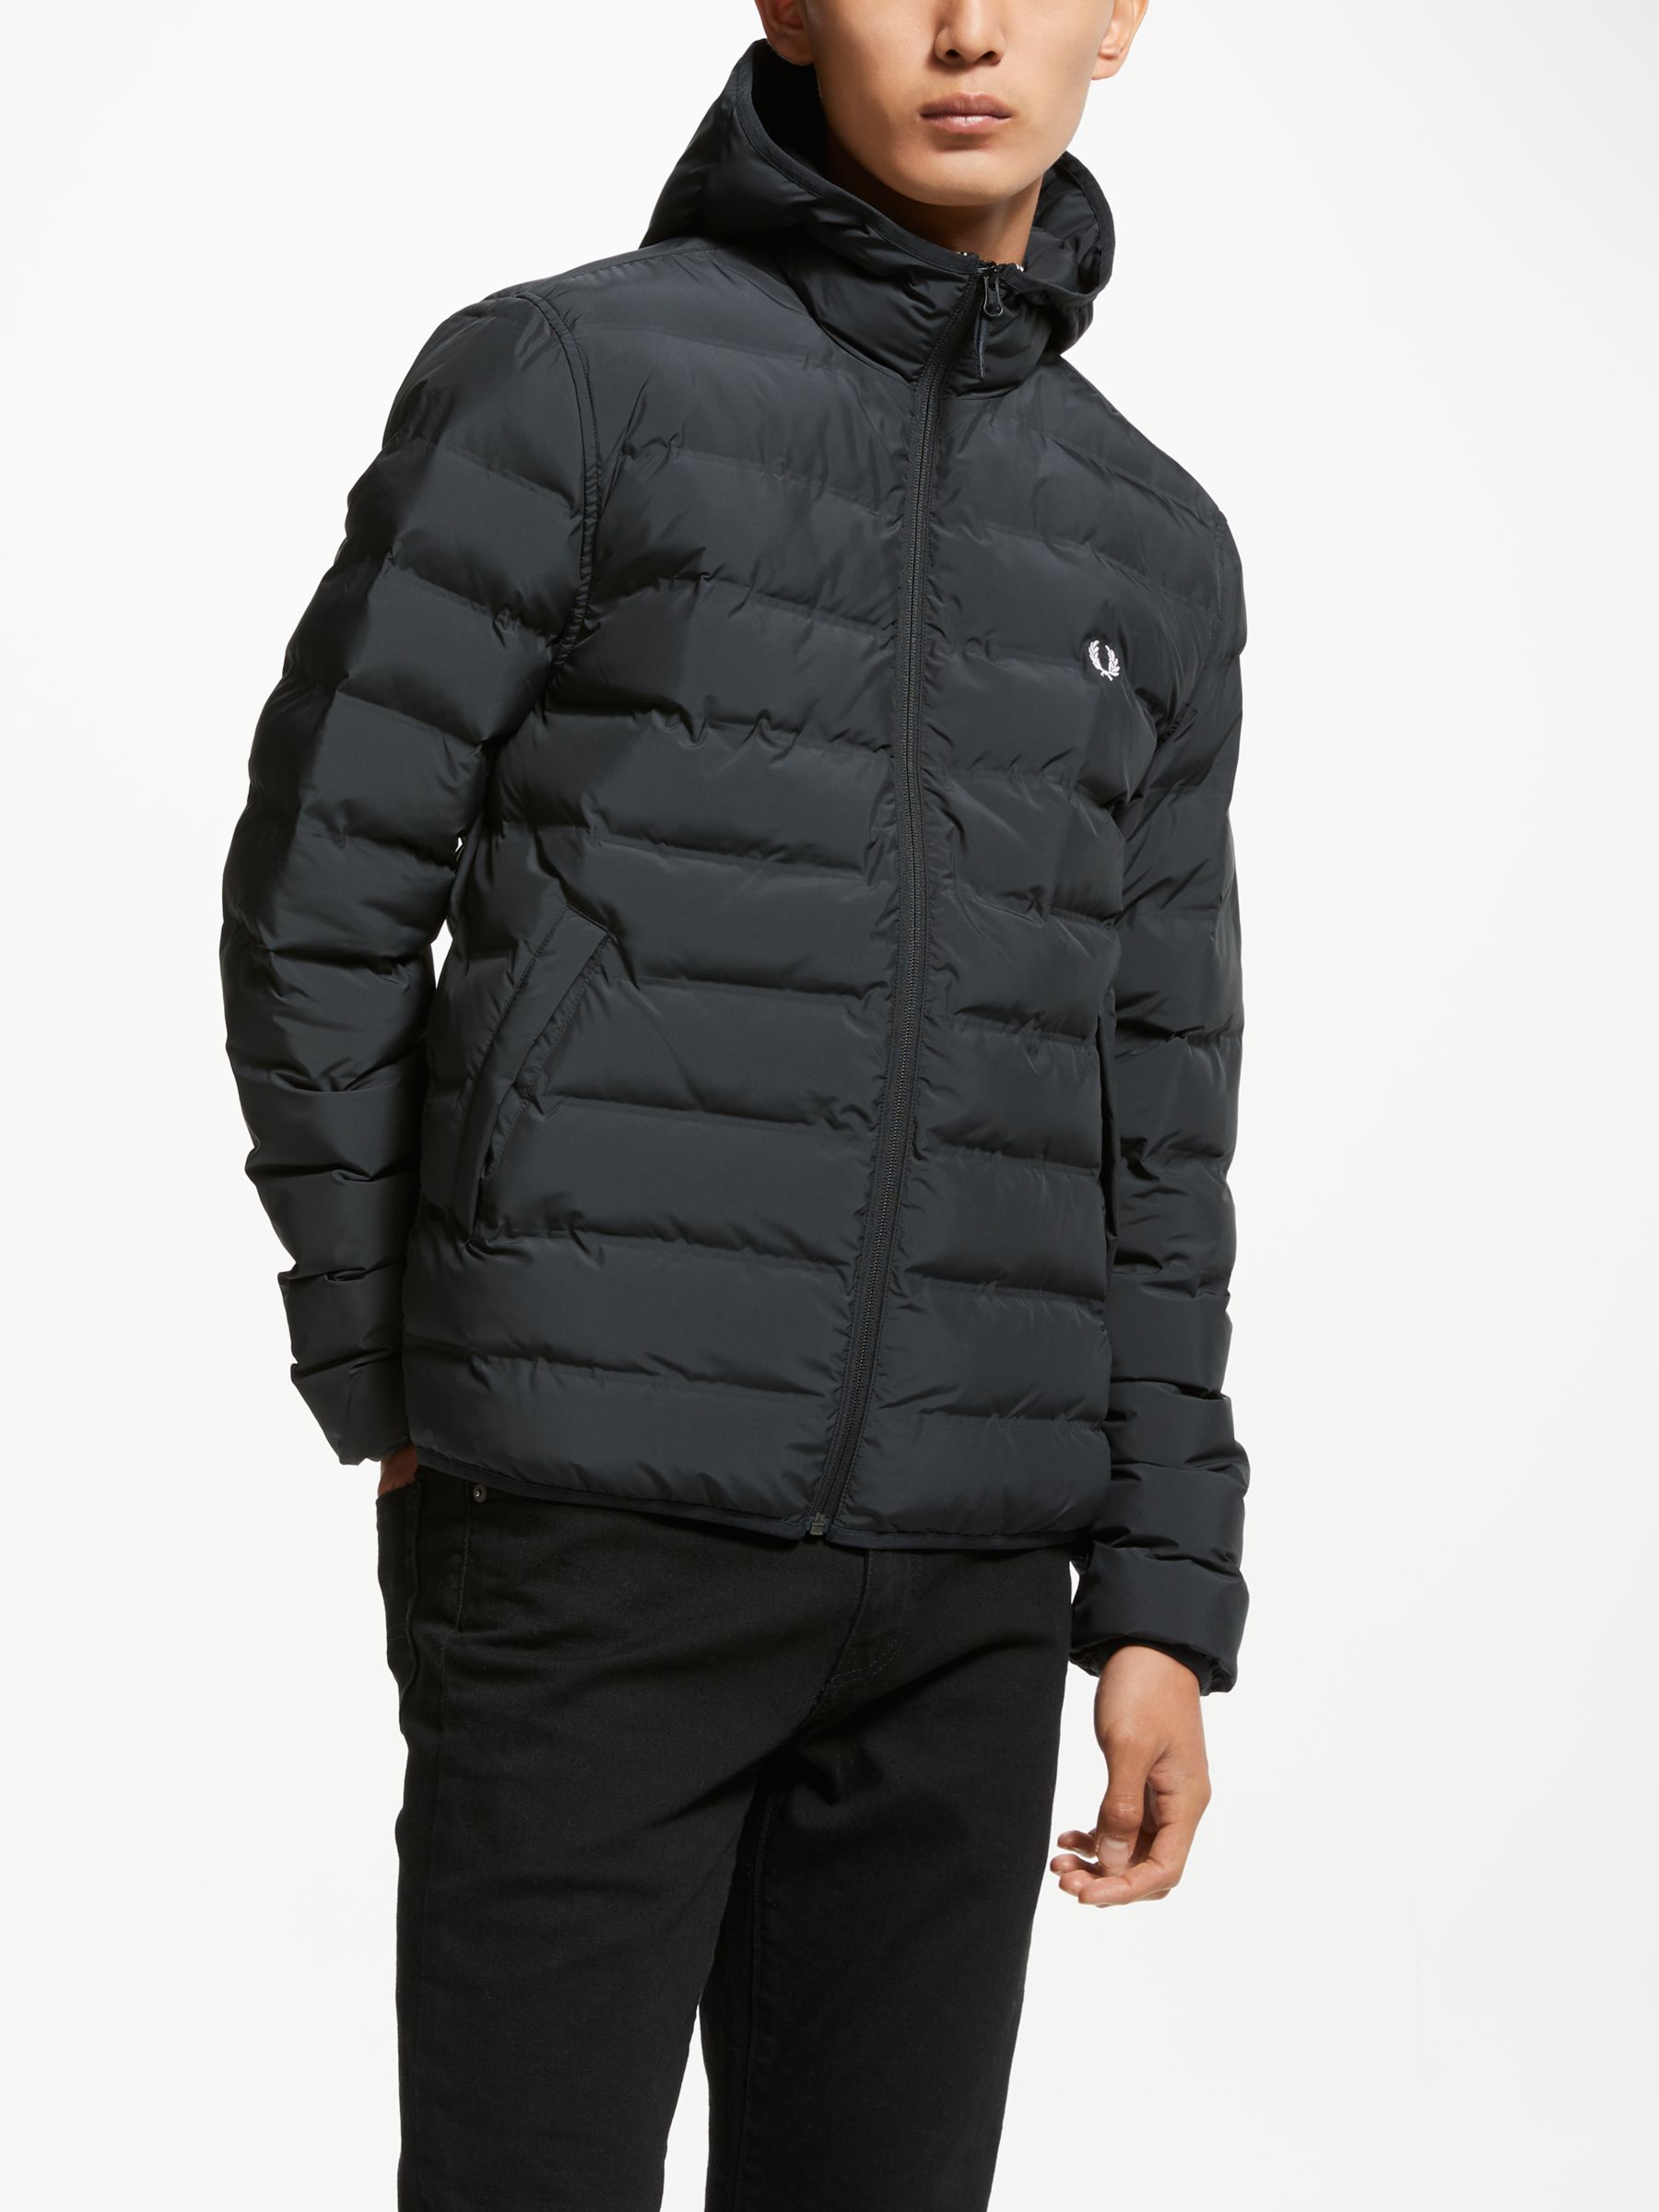 Fred Perry Brentham Hooded Puffer Jacket, Black, XL